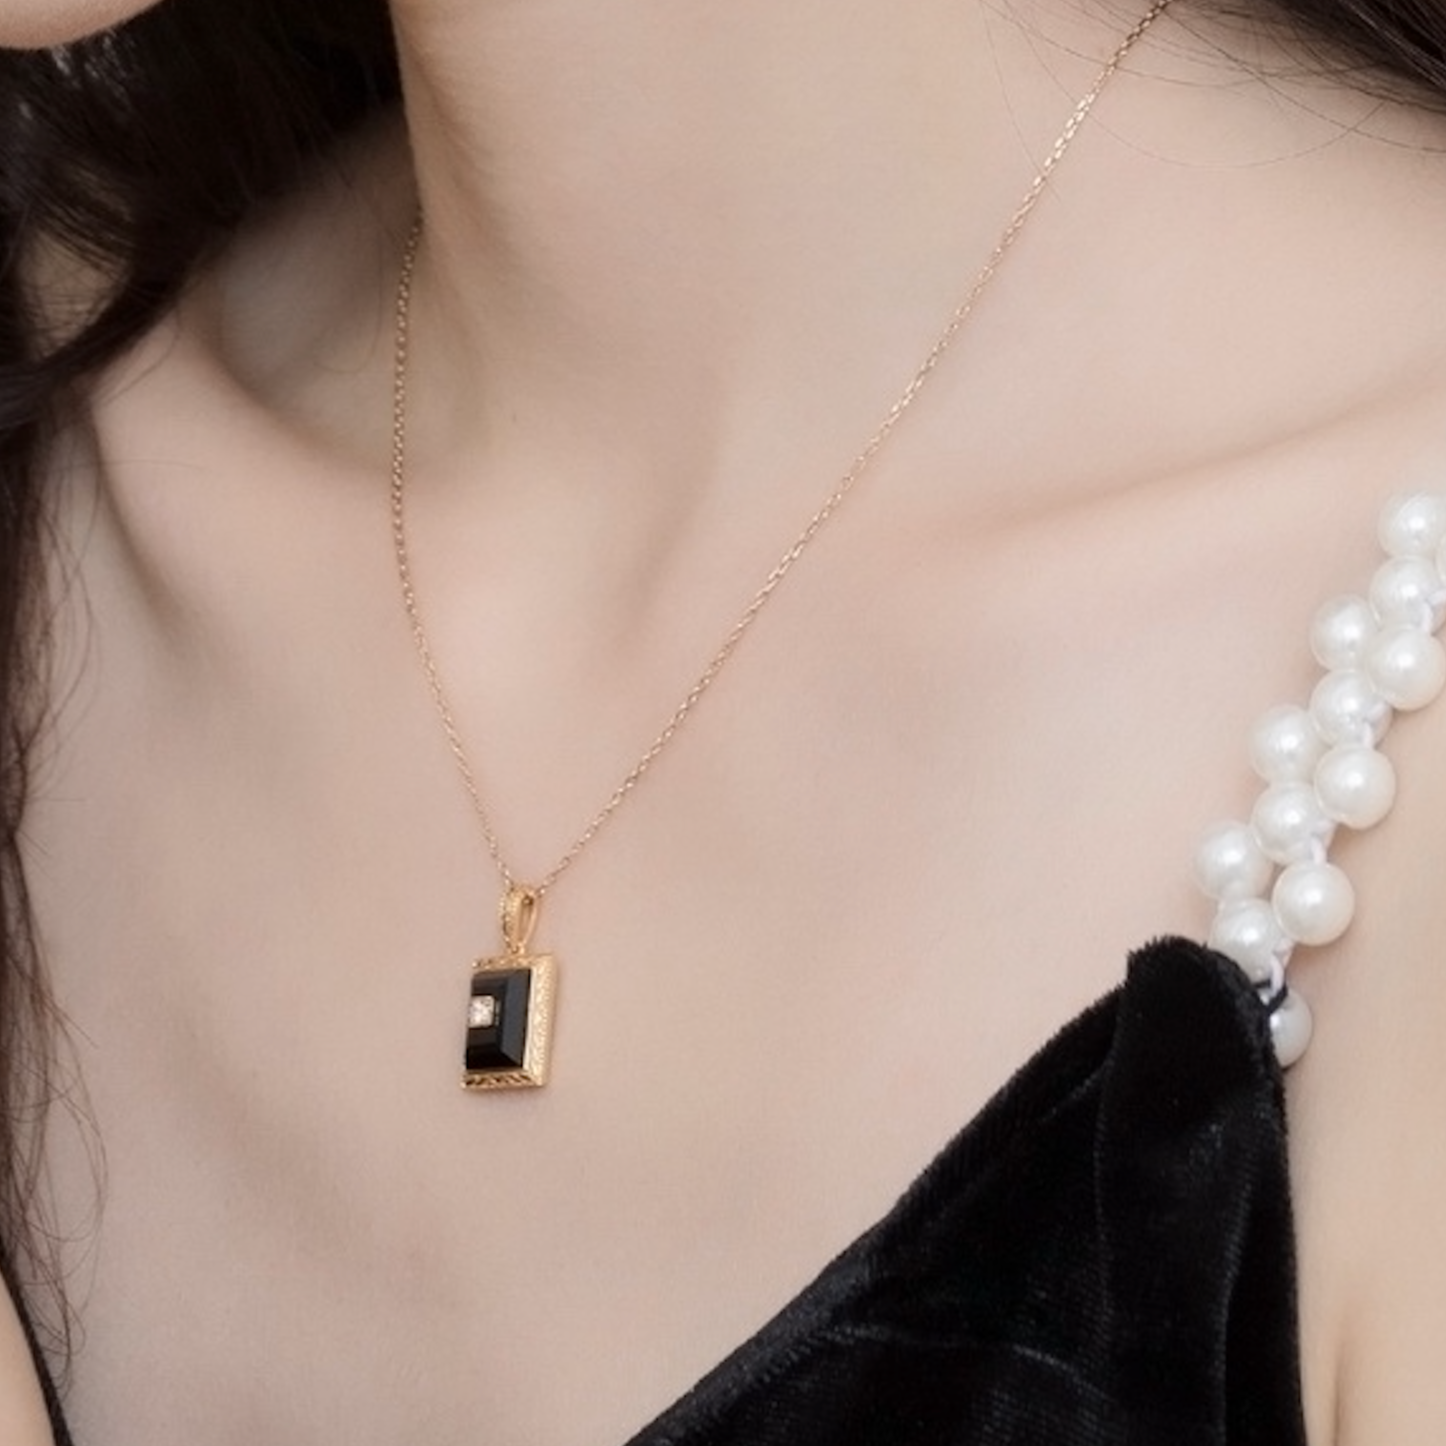 Black and Gold Agate Square Statement Pendant Necklace